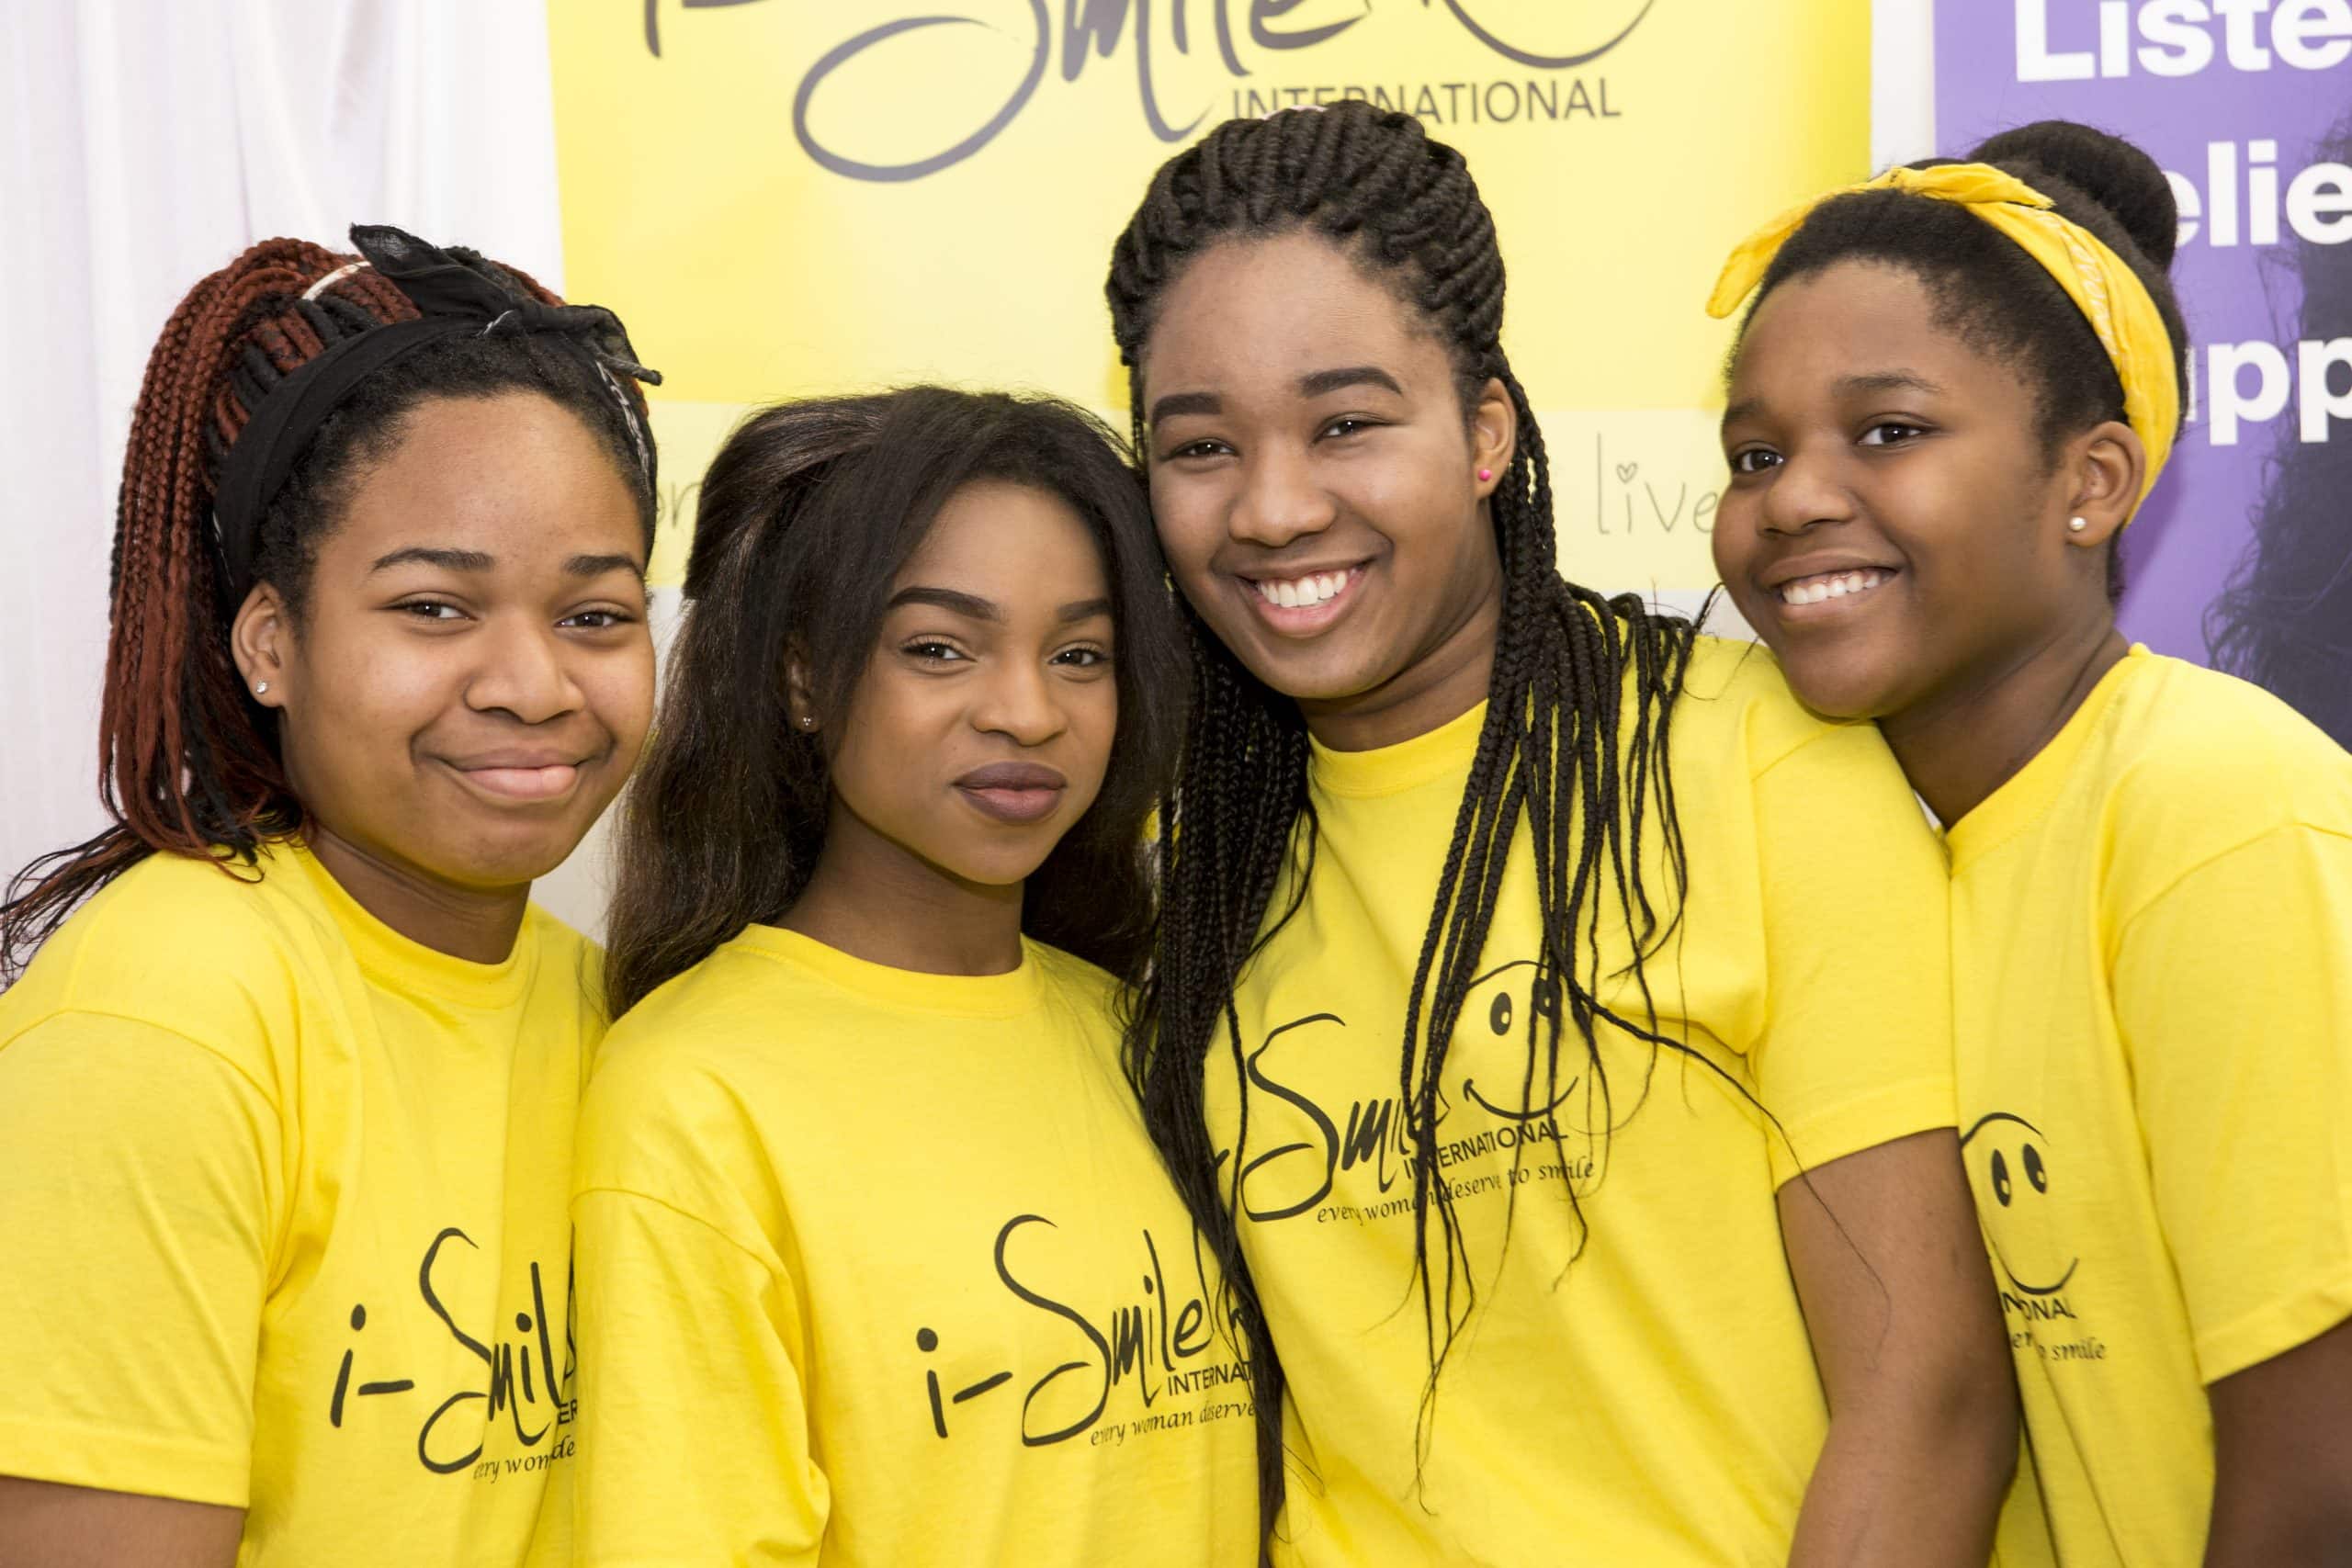 i-Smile International Womens Day event 2015